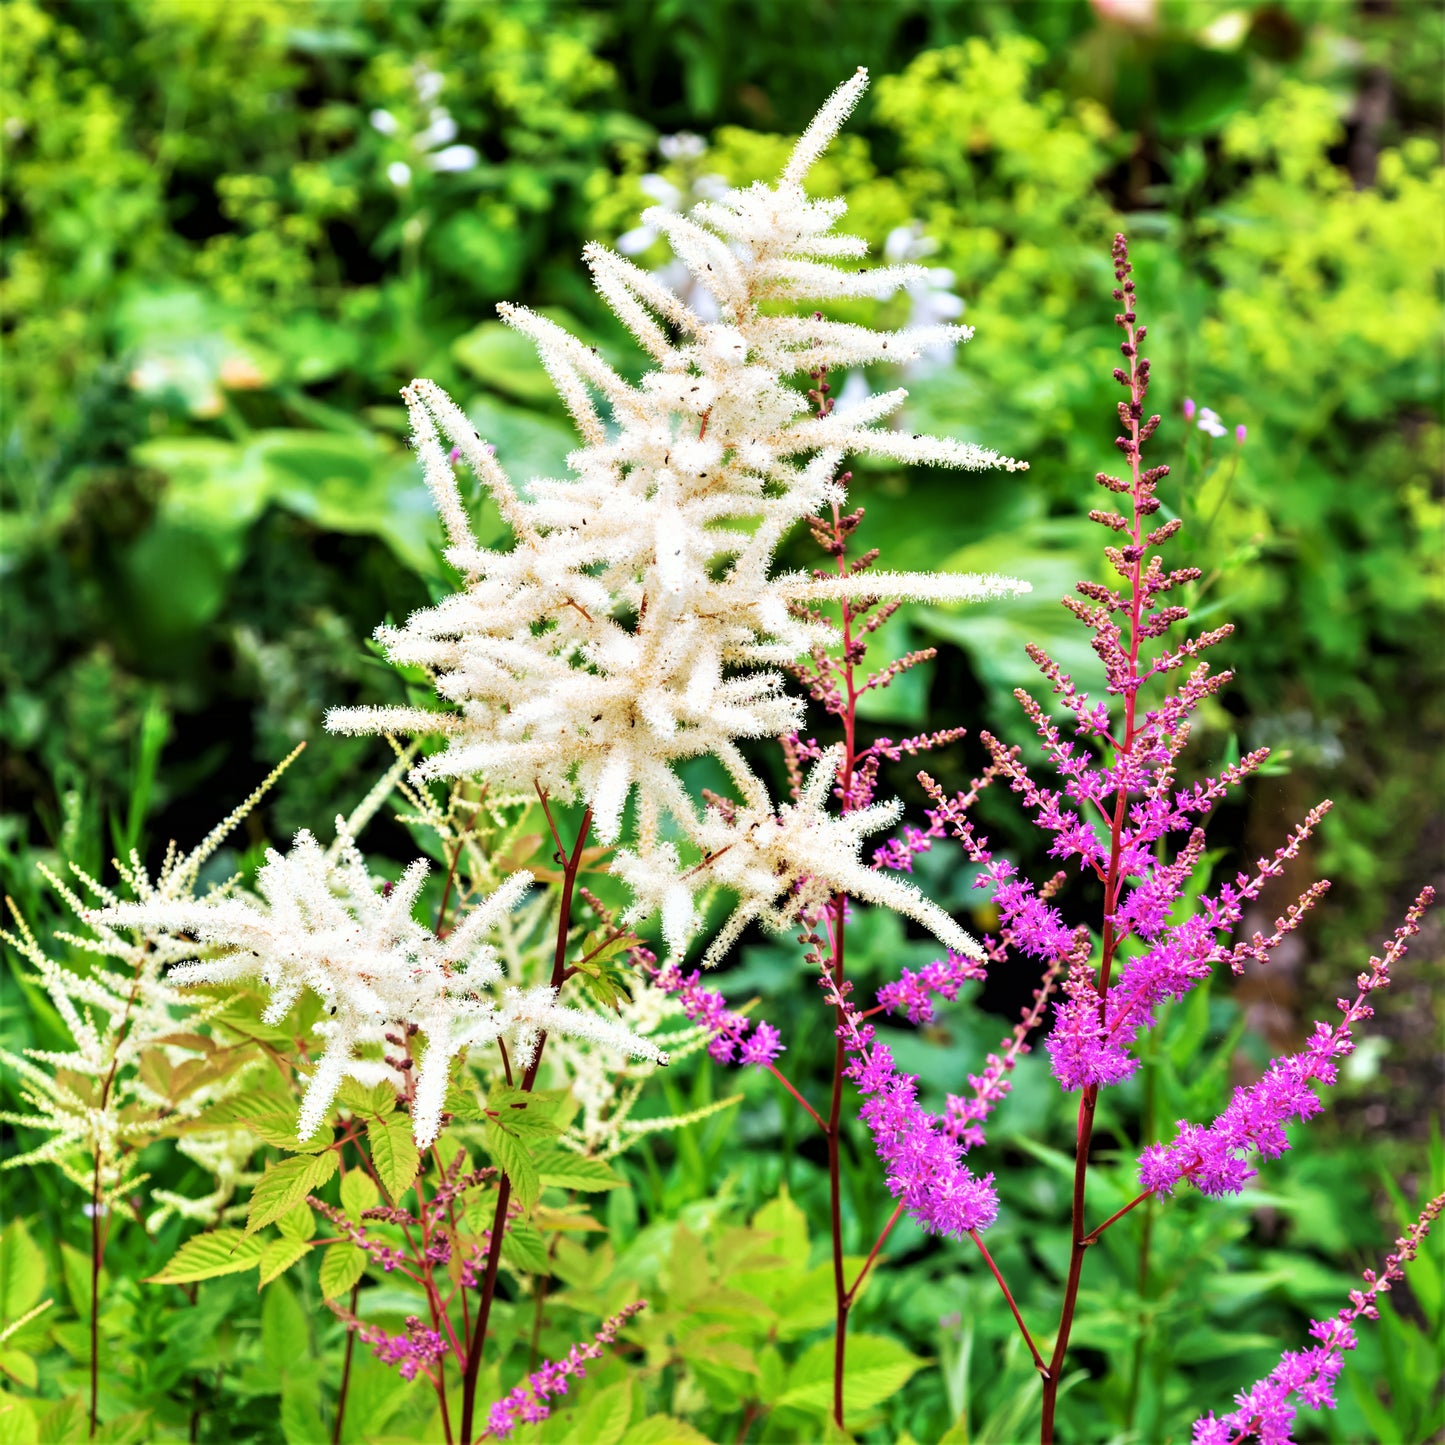 Bright "Younique White" Astilbe Flowers